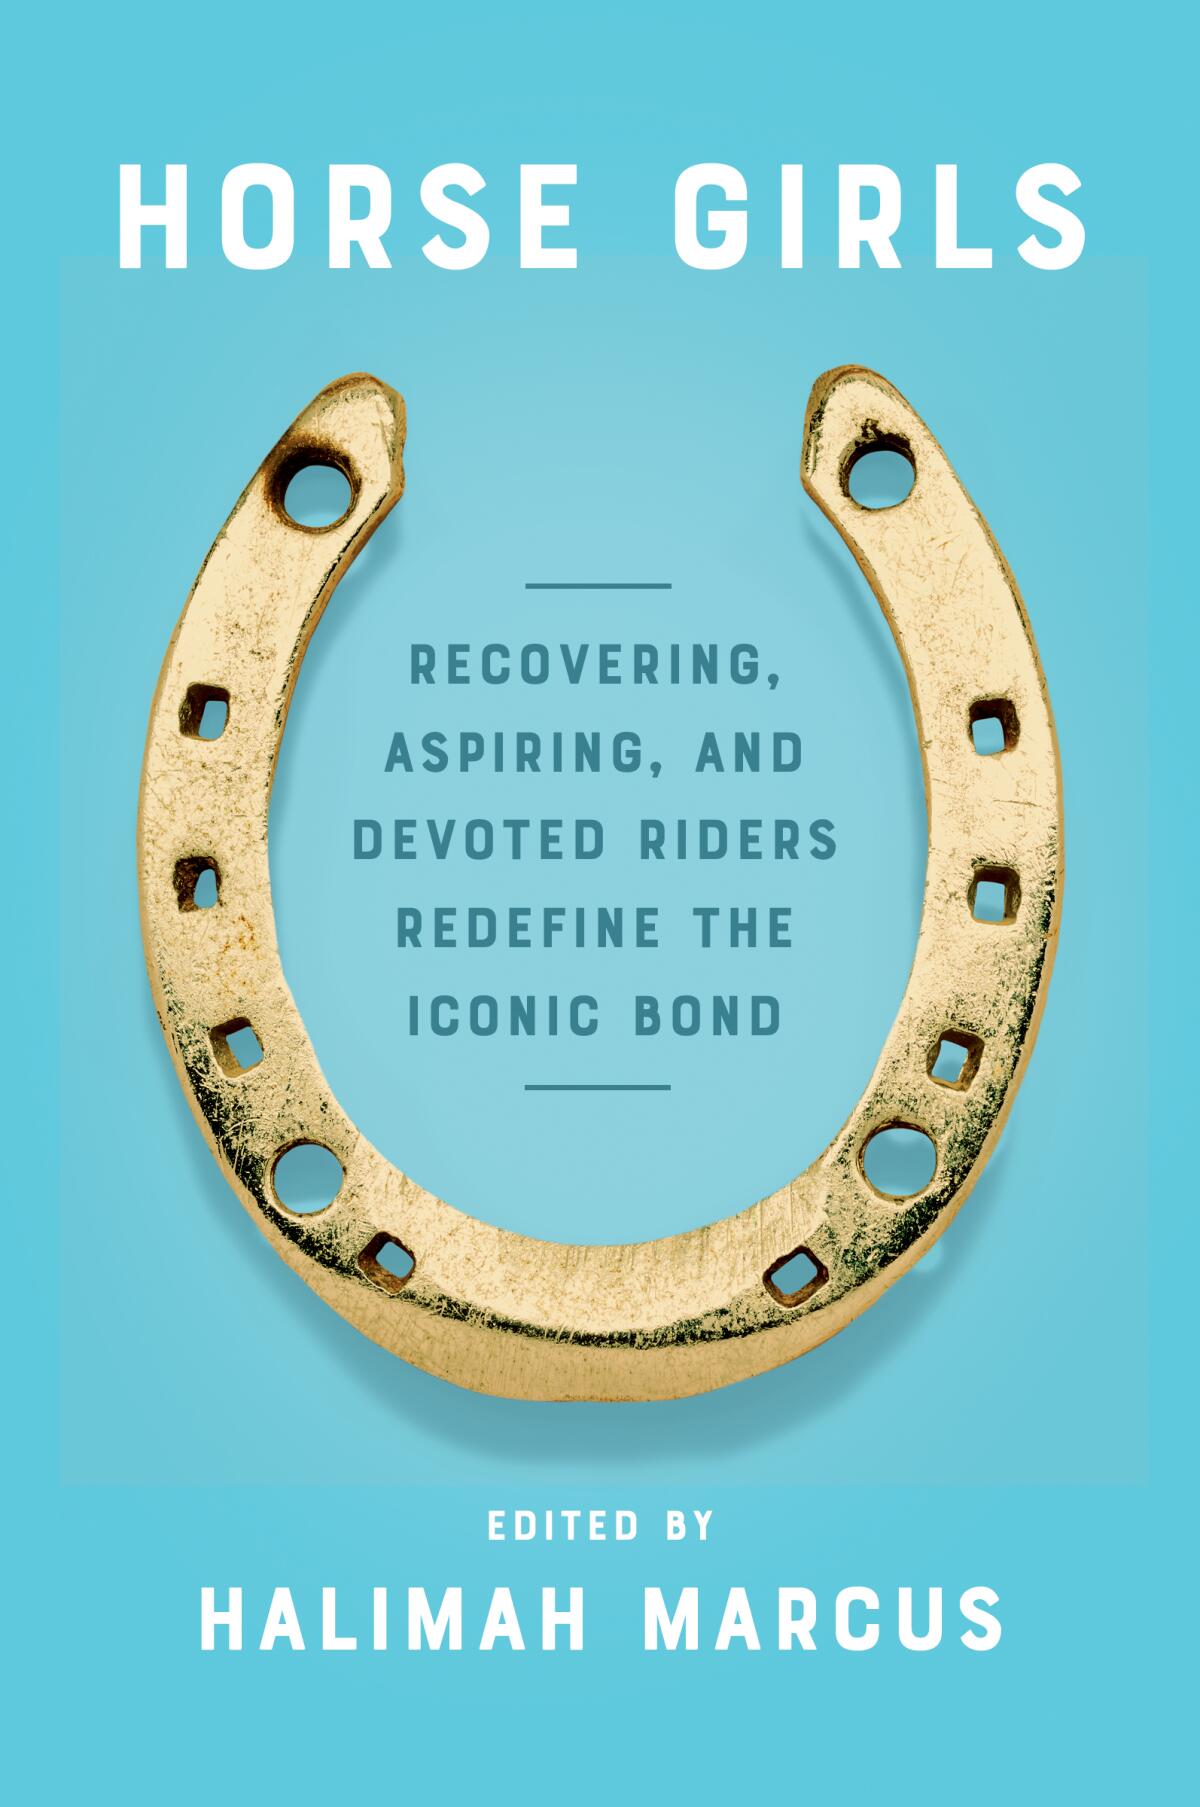 Blue cover of "Horse Girls: Recovering, Aspiring, and Devoted Riders Redefine the Iconic Bond" with a gold horseshoe